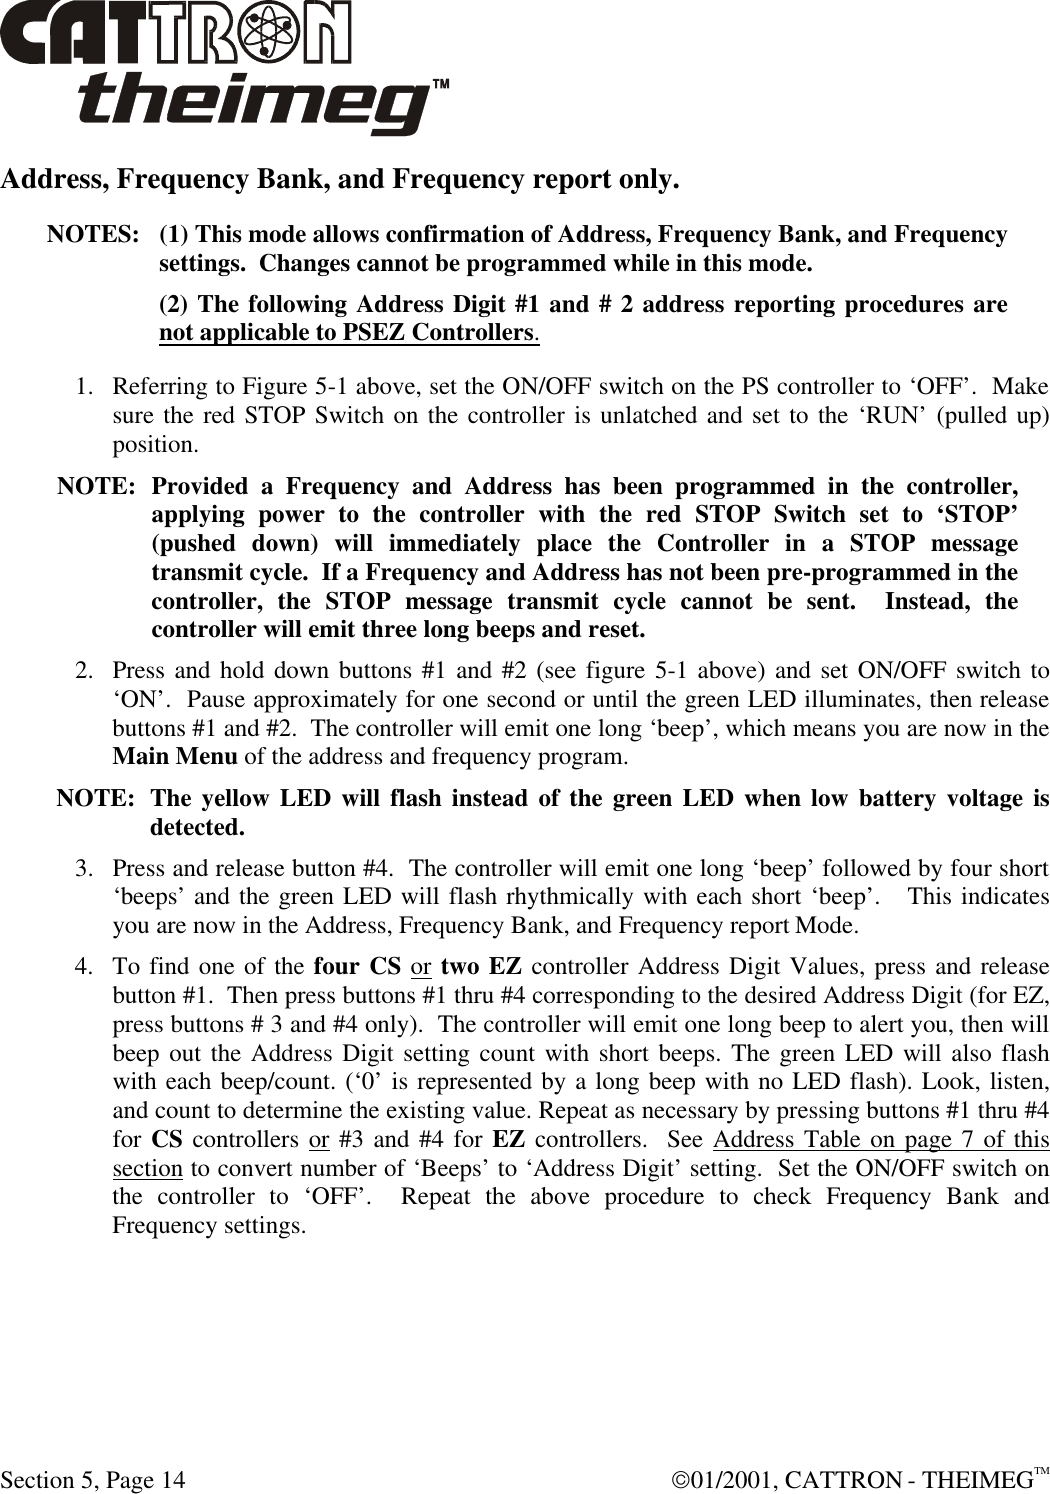  Section 5, Page 14  01/2001, CATTRON - THEIMEGTM Address, Frequency Bank, and Frequency report only. NOTES: (1) This mode allows confirmation of Address, Frequency Bank, and Frequency settings.  Changes cannot be programmed while in this mode. (2) The following Address Digit #1 and # 2 address reporting procedures are not applicable to PSEZ Controllers. 1. Referring to Figure 5-1 above, set the ON/OFF switch on the PS controller to ‘OFF’.  Make sure the red STOP Switch on the controller is unlatched and set to the ‘RUN’ (pulled up) position.   NOTE: Provided a Frequency and Address has been programmed in the controller, applying power to the controller with the red STOP Switch set to ‘STOP’ (pushed down) will immediately place the Controller in a STOP message transmit cycle.  If a Frequency and Address has not been pre-programmed in the controller, the STOP message transmit cycle cannot be sent.  Instead, the controller will emit three long beeps and reset.  2. Press and hold down buttons #1 and #2 (see figure 5-1 above) and set ON/OFF switch to ‘ON’.  Pause approximately for one second or until the green LED illuminates, then release buttons #1 and #2.  The controller will emit one long ‘beep’, which means you are now in the Main Menu of the address and frequency program.   NOTE: The yellow LED will flash instead of the green LED when low battery voltage is detected. 3. Press and release button #4.  The controller will emit one long ‘beep’ followed by four short ‘beeps’ and the green LED will flash rhythmically with each short ‘beep’.   This indicates you are now in the Address, Frequency Bank, and Frequency report Mode. 4. To find one of the four CS or two EZ controller Address Digit Values, press and release button #1.  Then press buttons #1 thru #4 corresponding to the desired Address Digit (for EZ, press buttons # 3 and #4 only).  The controller will emit one long beep to alert you, then will beep out the Address Digit setting count with short beeps. The green LED will also flash with each beep/count. (‘0’ is represented by a long beep with no LED flash). Look, listen, and count to determine the existing value. Repeat as necessary by pressing buttons #1 thru #4 for CS controllers or #3 and #4 for EZ controllers.  See Address Table on page 7 of this section to convert number of ‘Beeps’ to ‘Address Digit’ setting.  Set the ON/OFF switch on the controller to ‘OFF’.  Repeat the above procedure to check Frequency Bank and Frequency settings.  